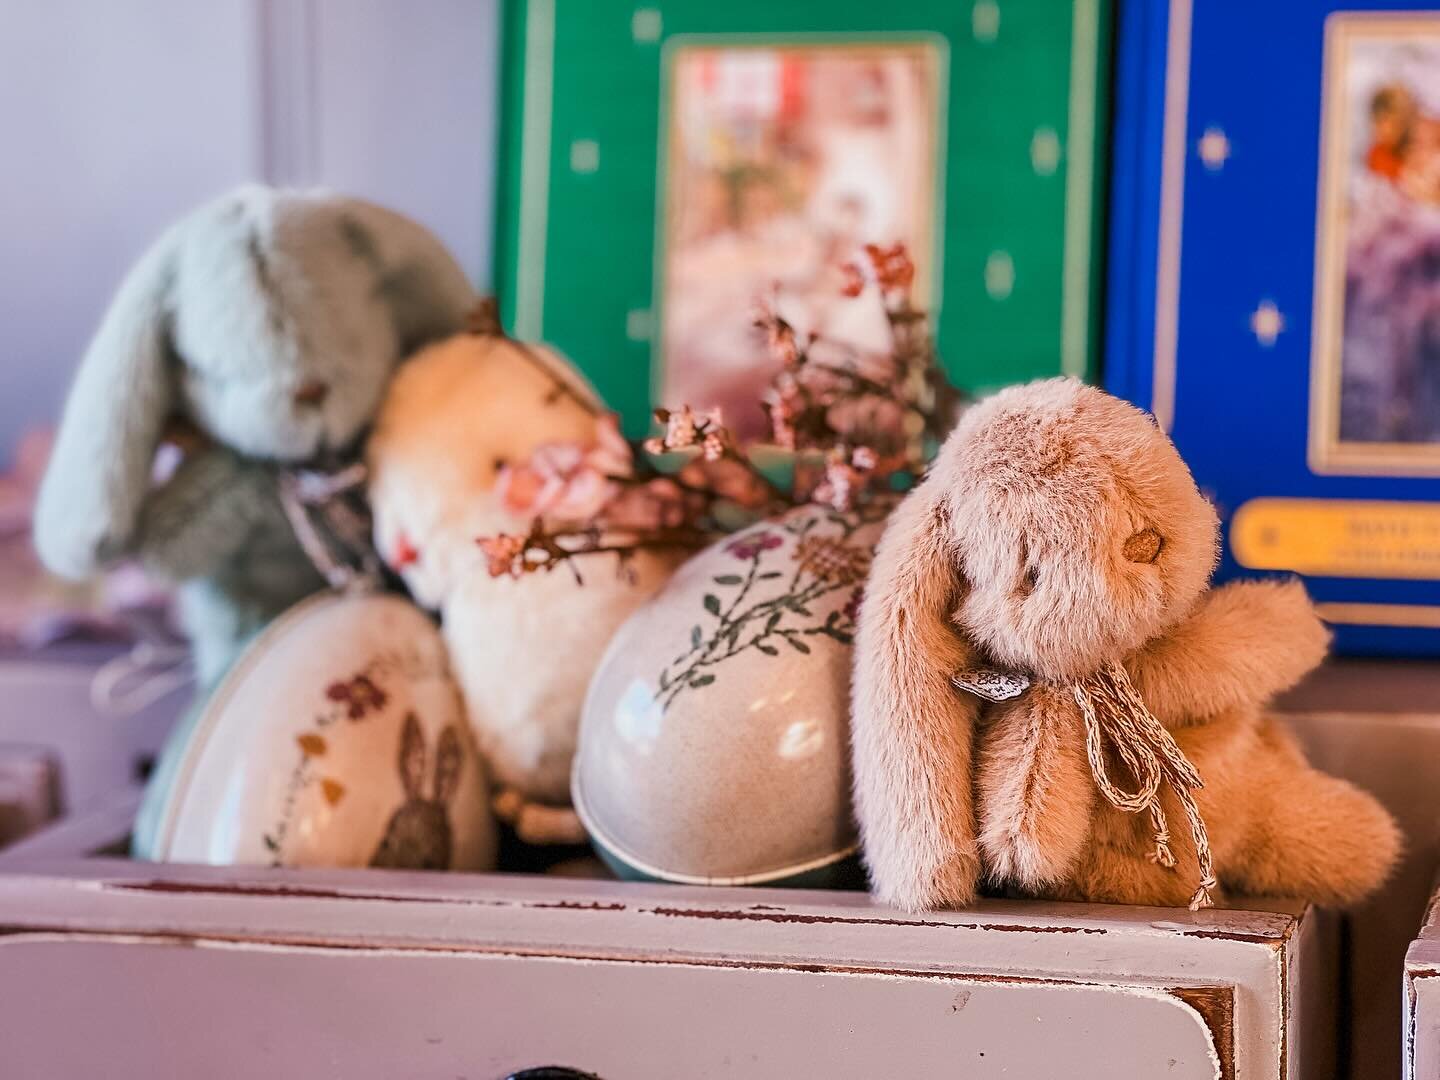 Some cute lil fluffy bunnies and chicks waiting to welcome spring 🌸✨